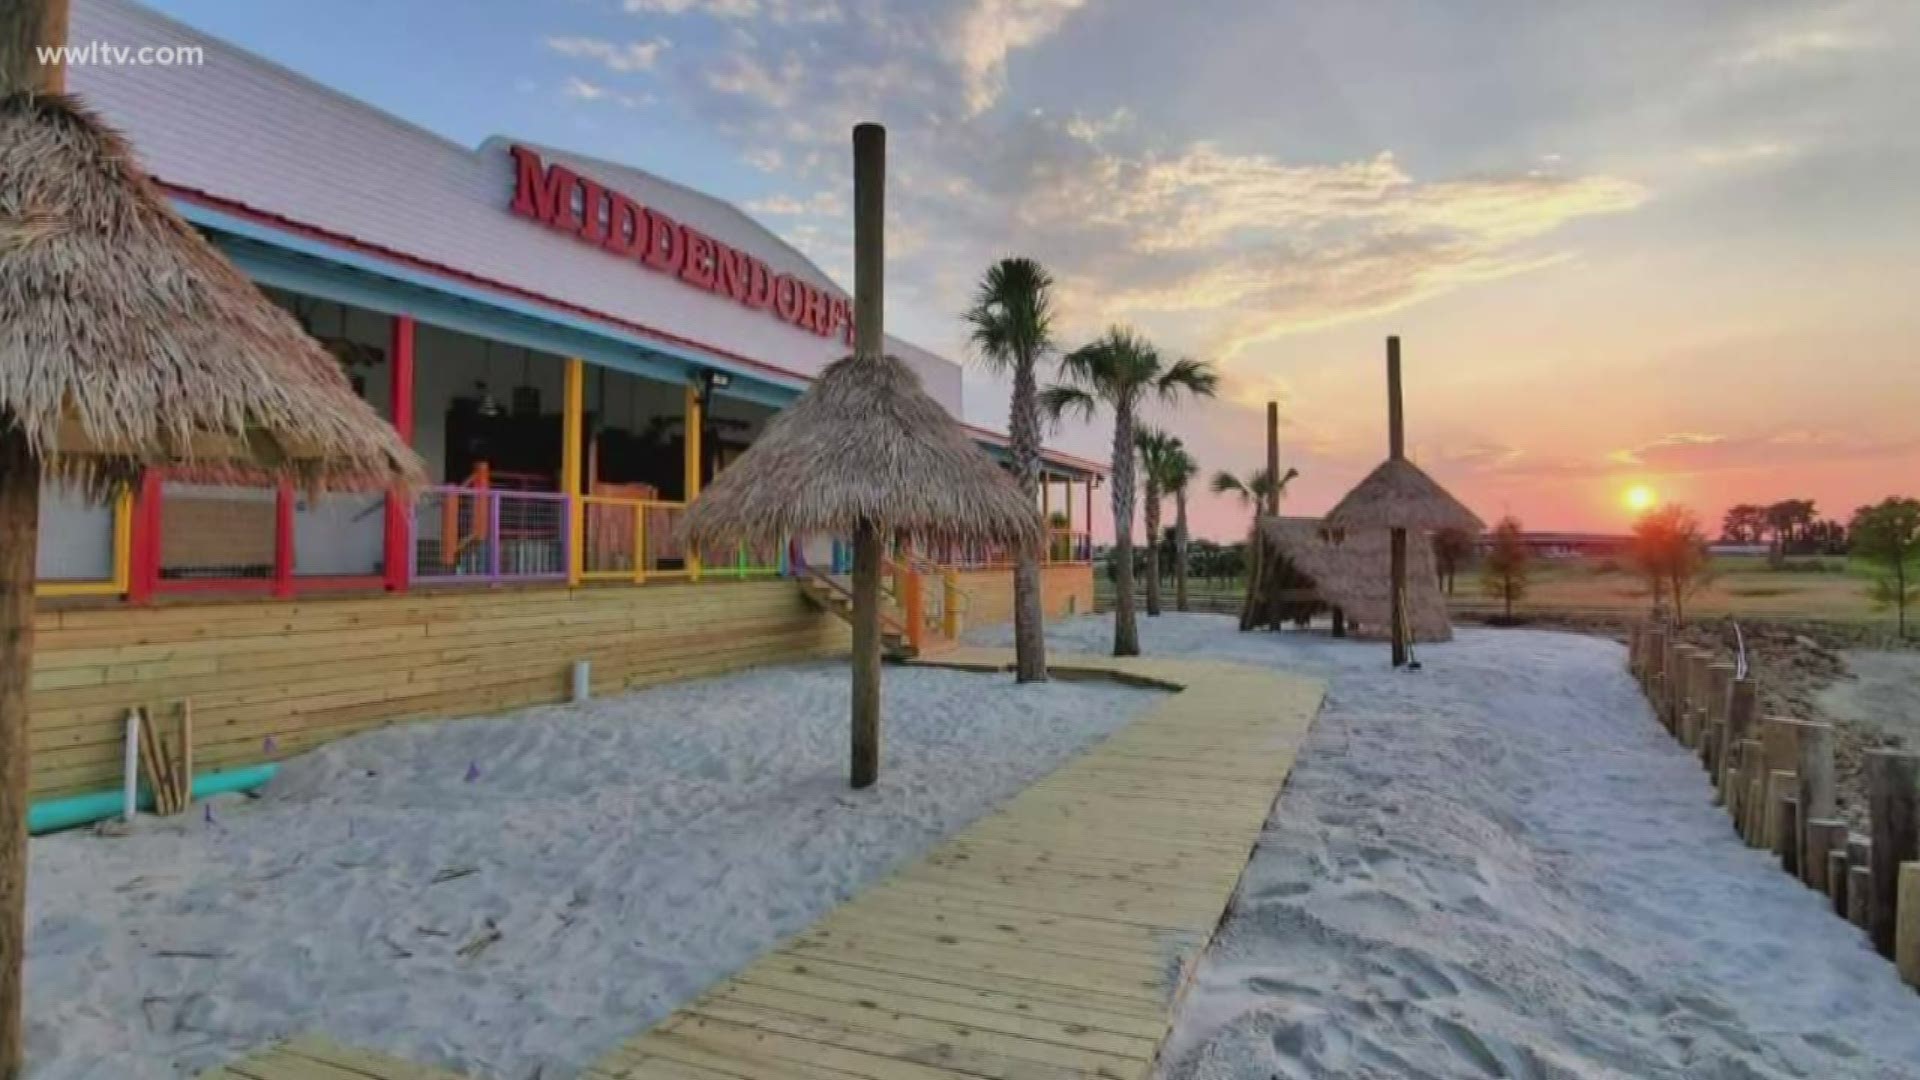 Access Code 70461: Middendorf's Restaurant expands to a second location